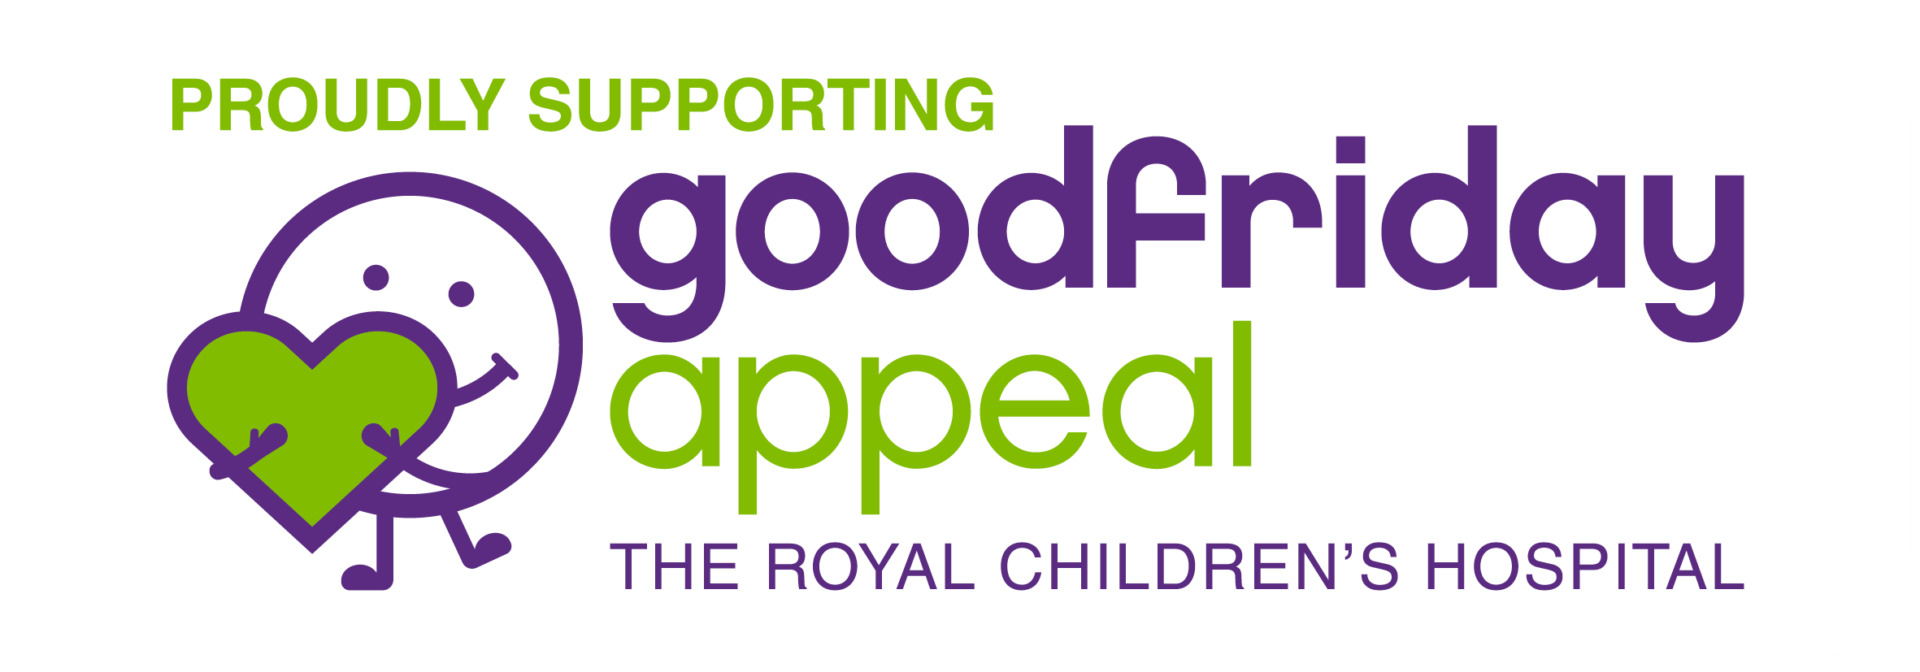 Link to the Royal Children's Hospital Good Friday Appeal website